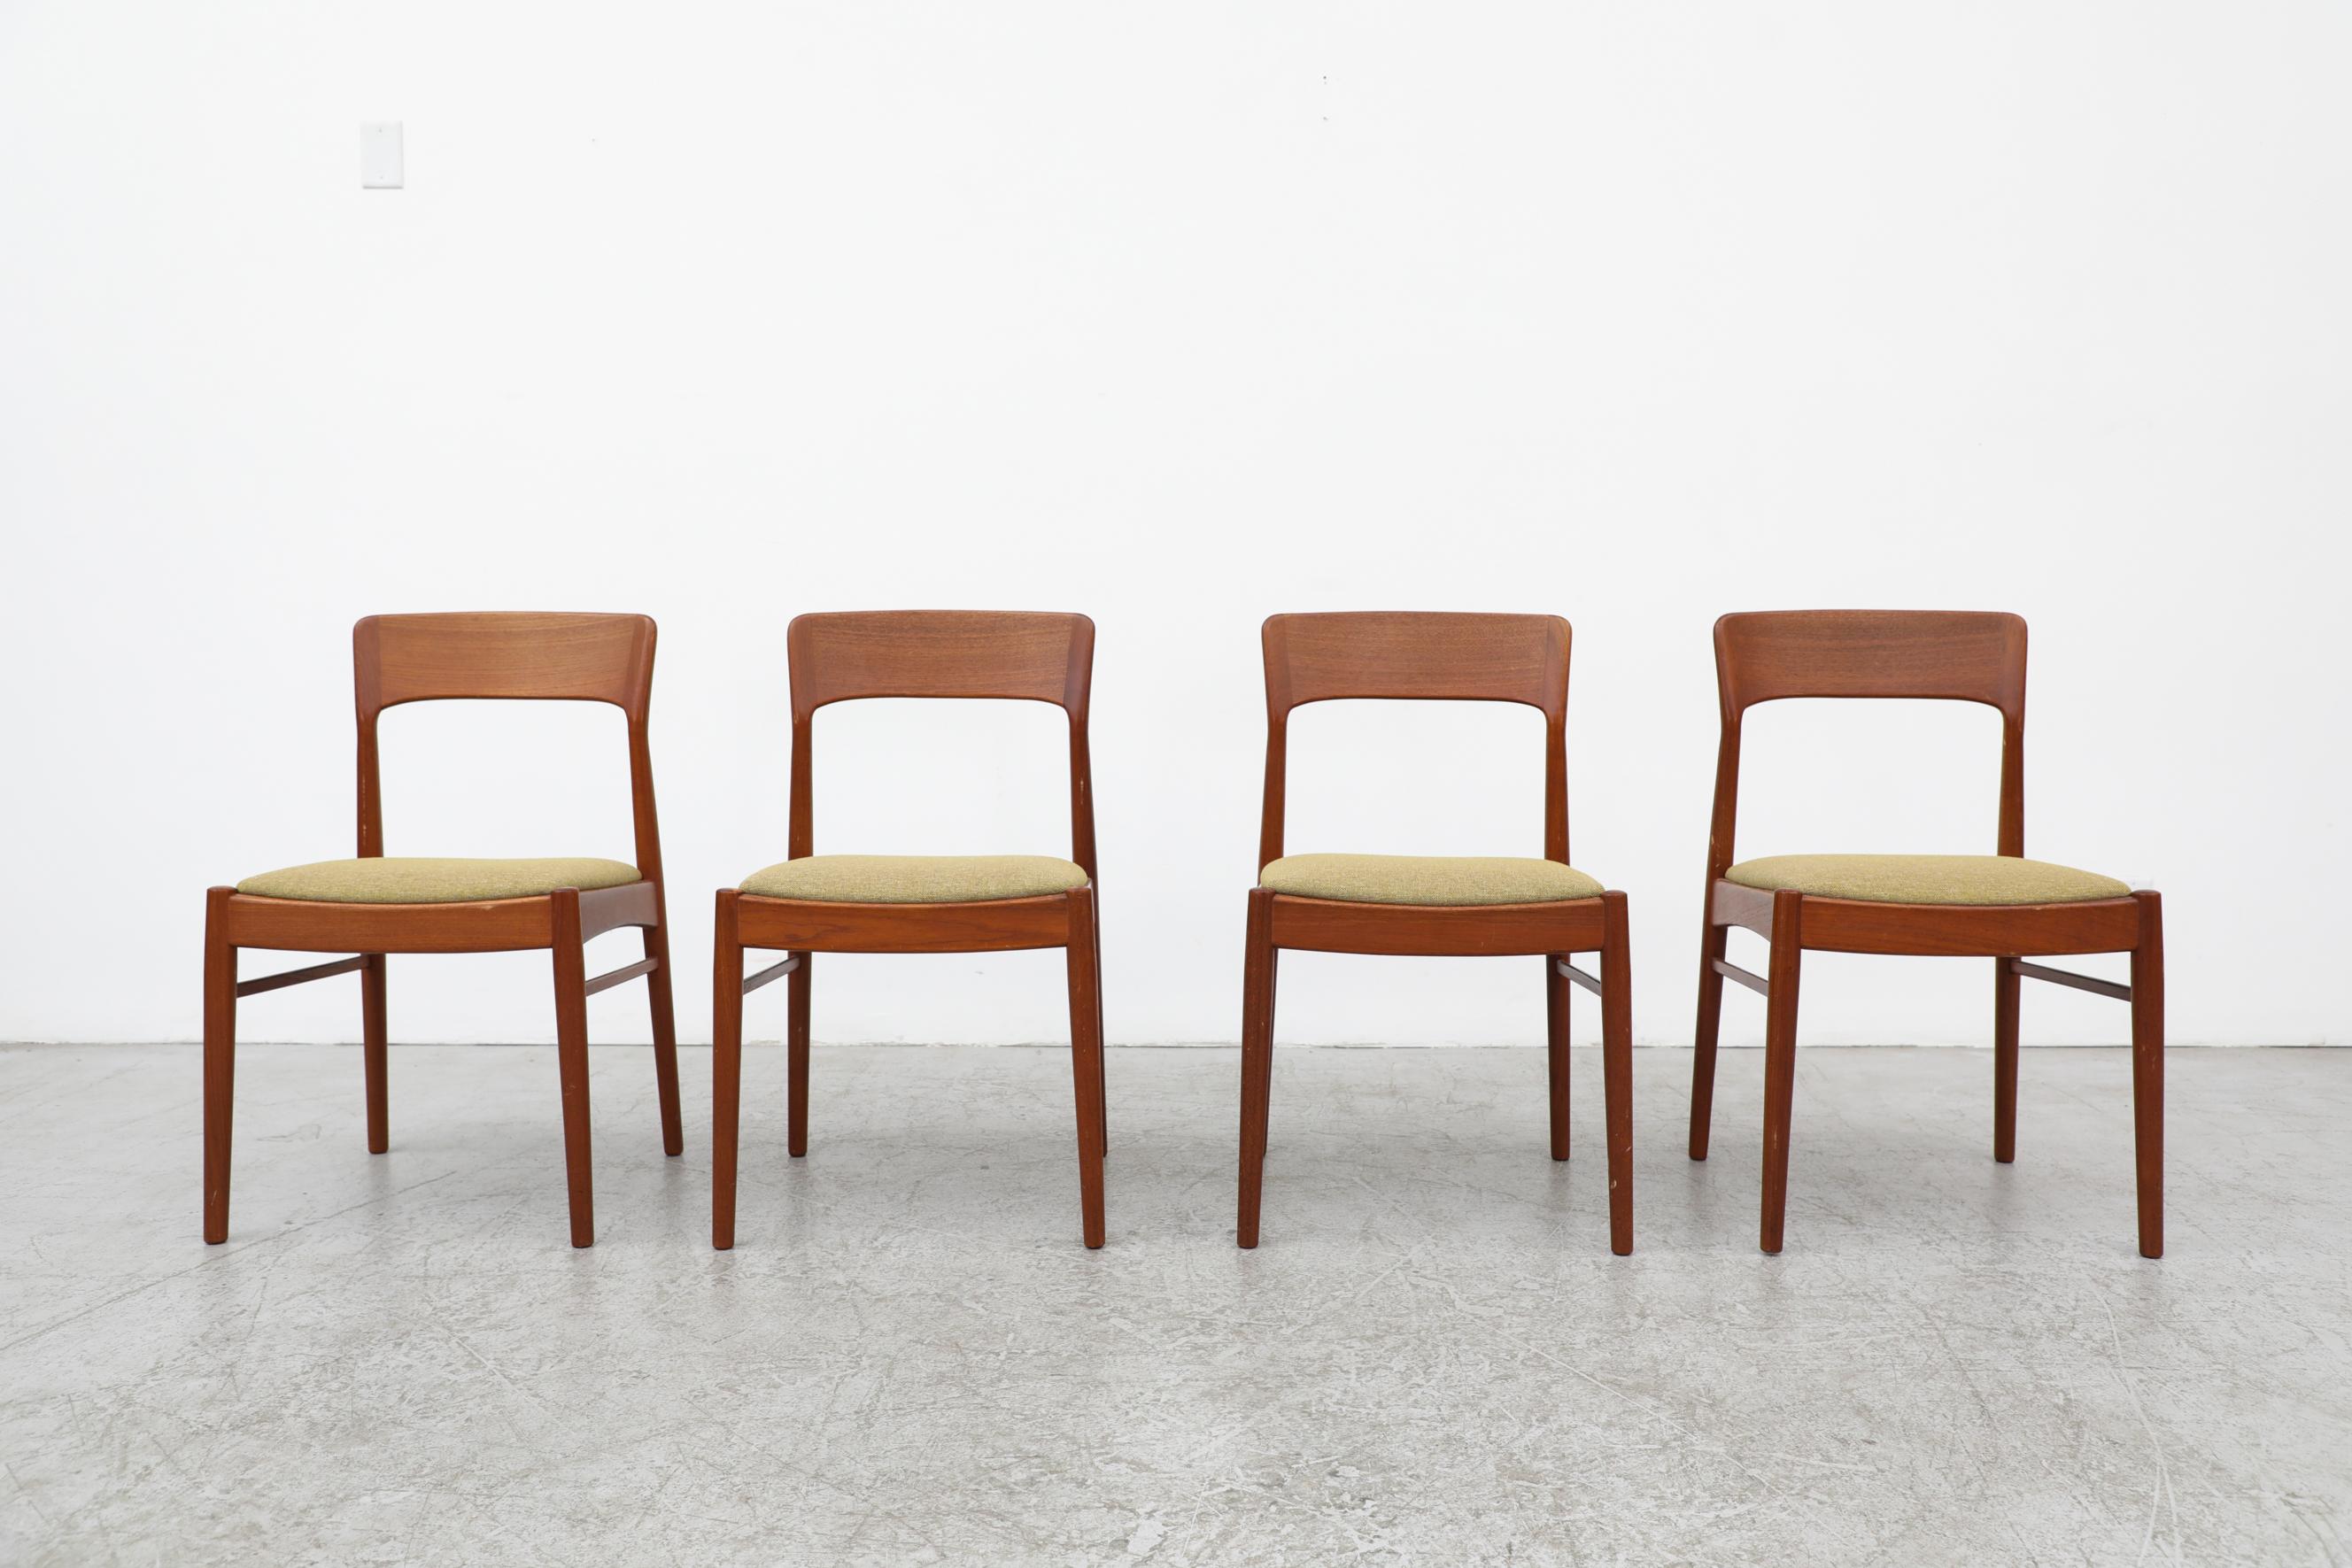 Set of 4 Kai Kristiansen Danish teak dining chairs with light green upholstered seats, designed for K.S. Mobler, Denmark. This model is very similar to the Model 75 chair by Niels Moller (S112-79). In original condition with visible wear and